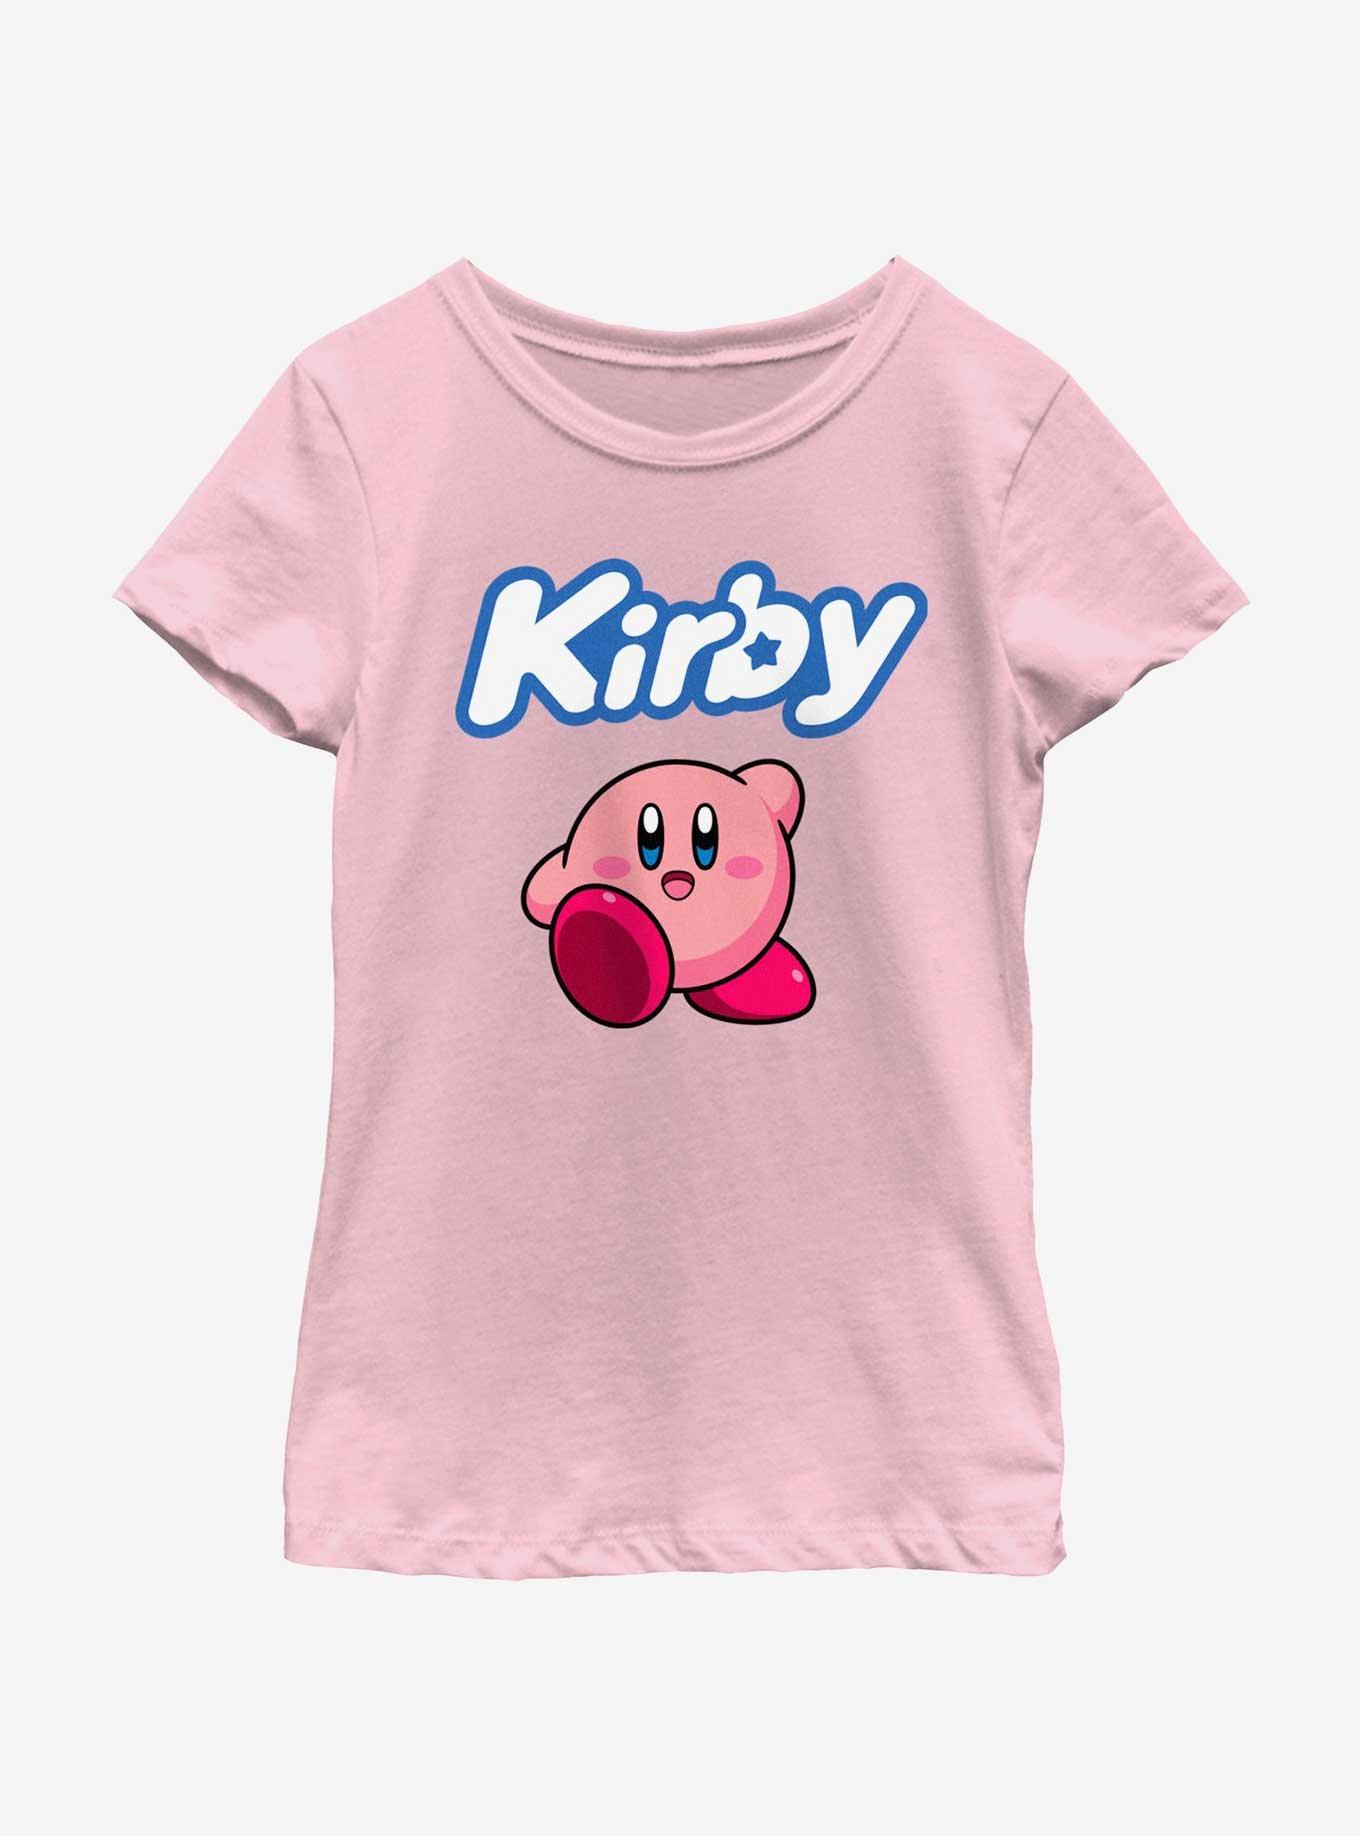 Kirby Simply Kirby Youth Girls T-Shirt, PINK, hi-res